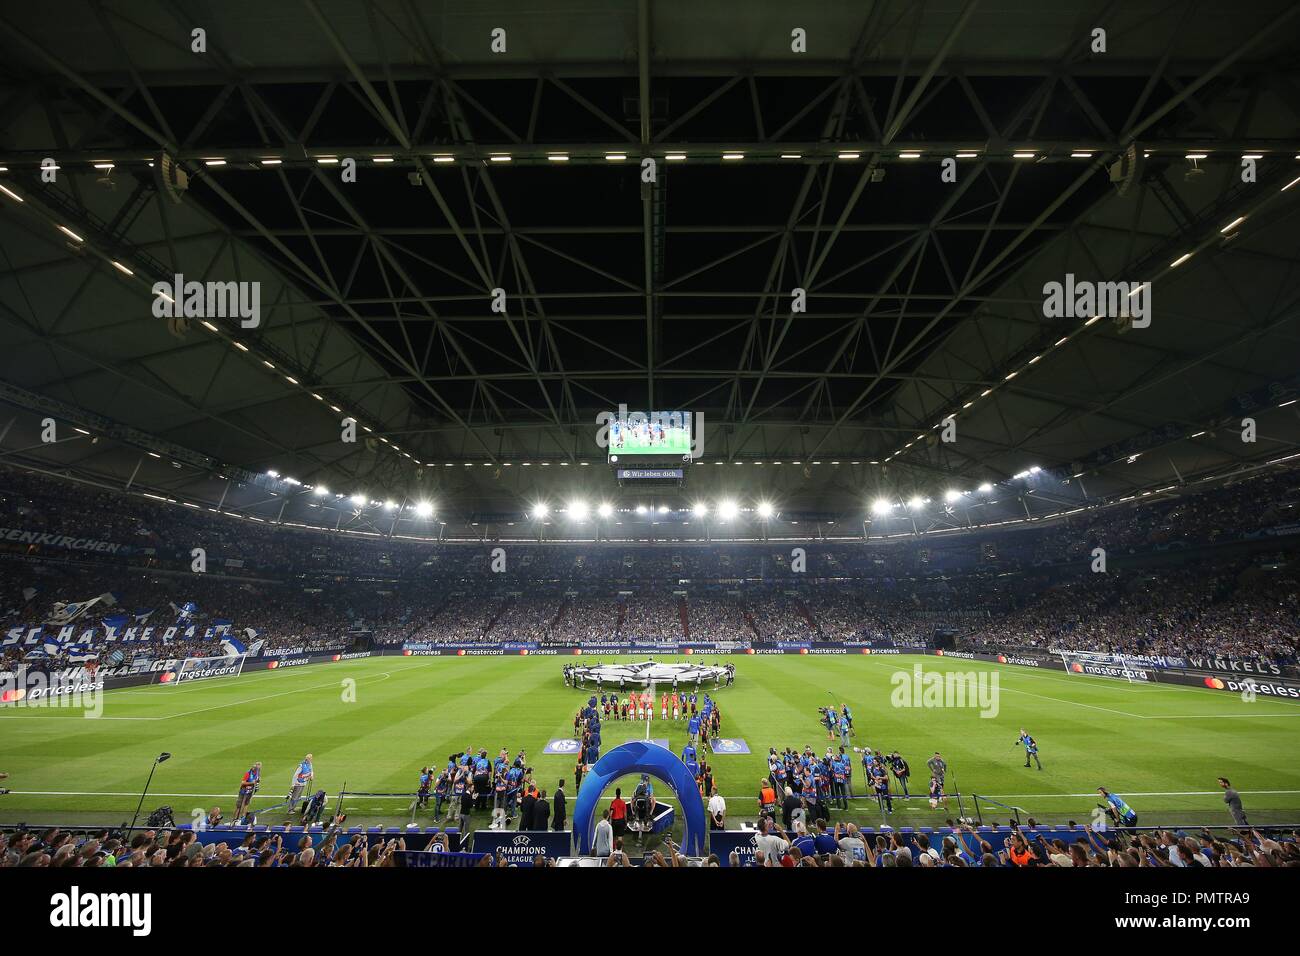 Champions League Anthem High Resolution Stock Photography And Images Alamy